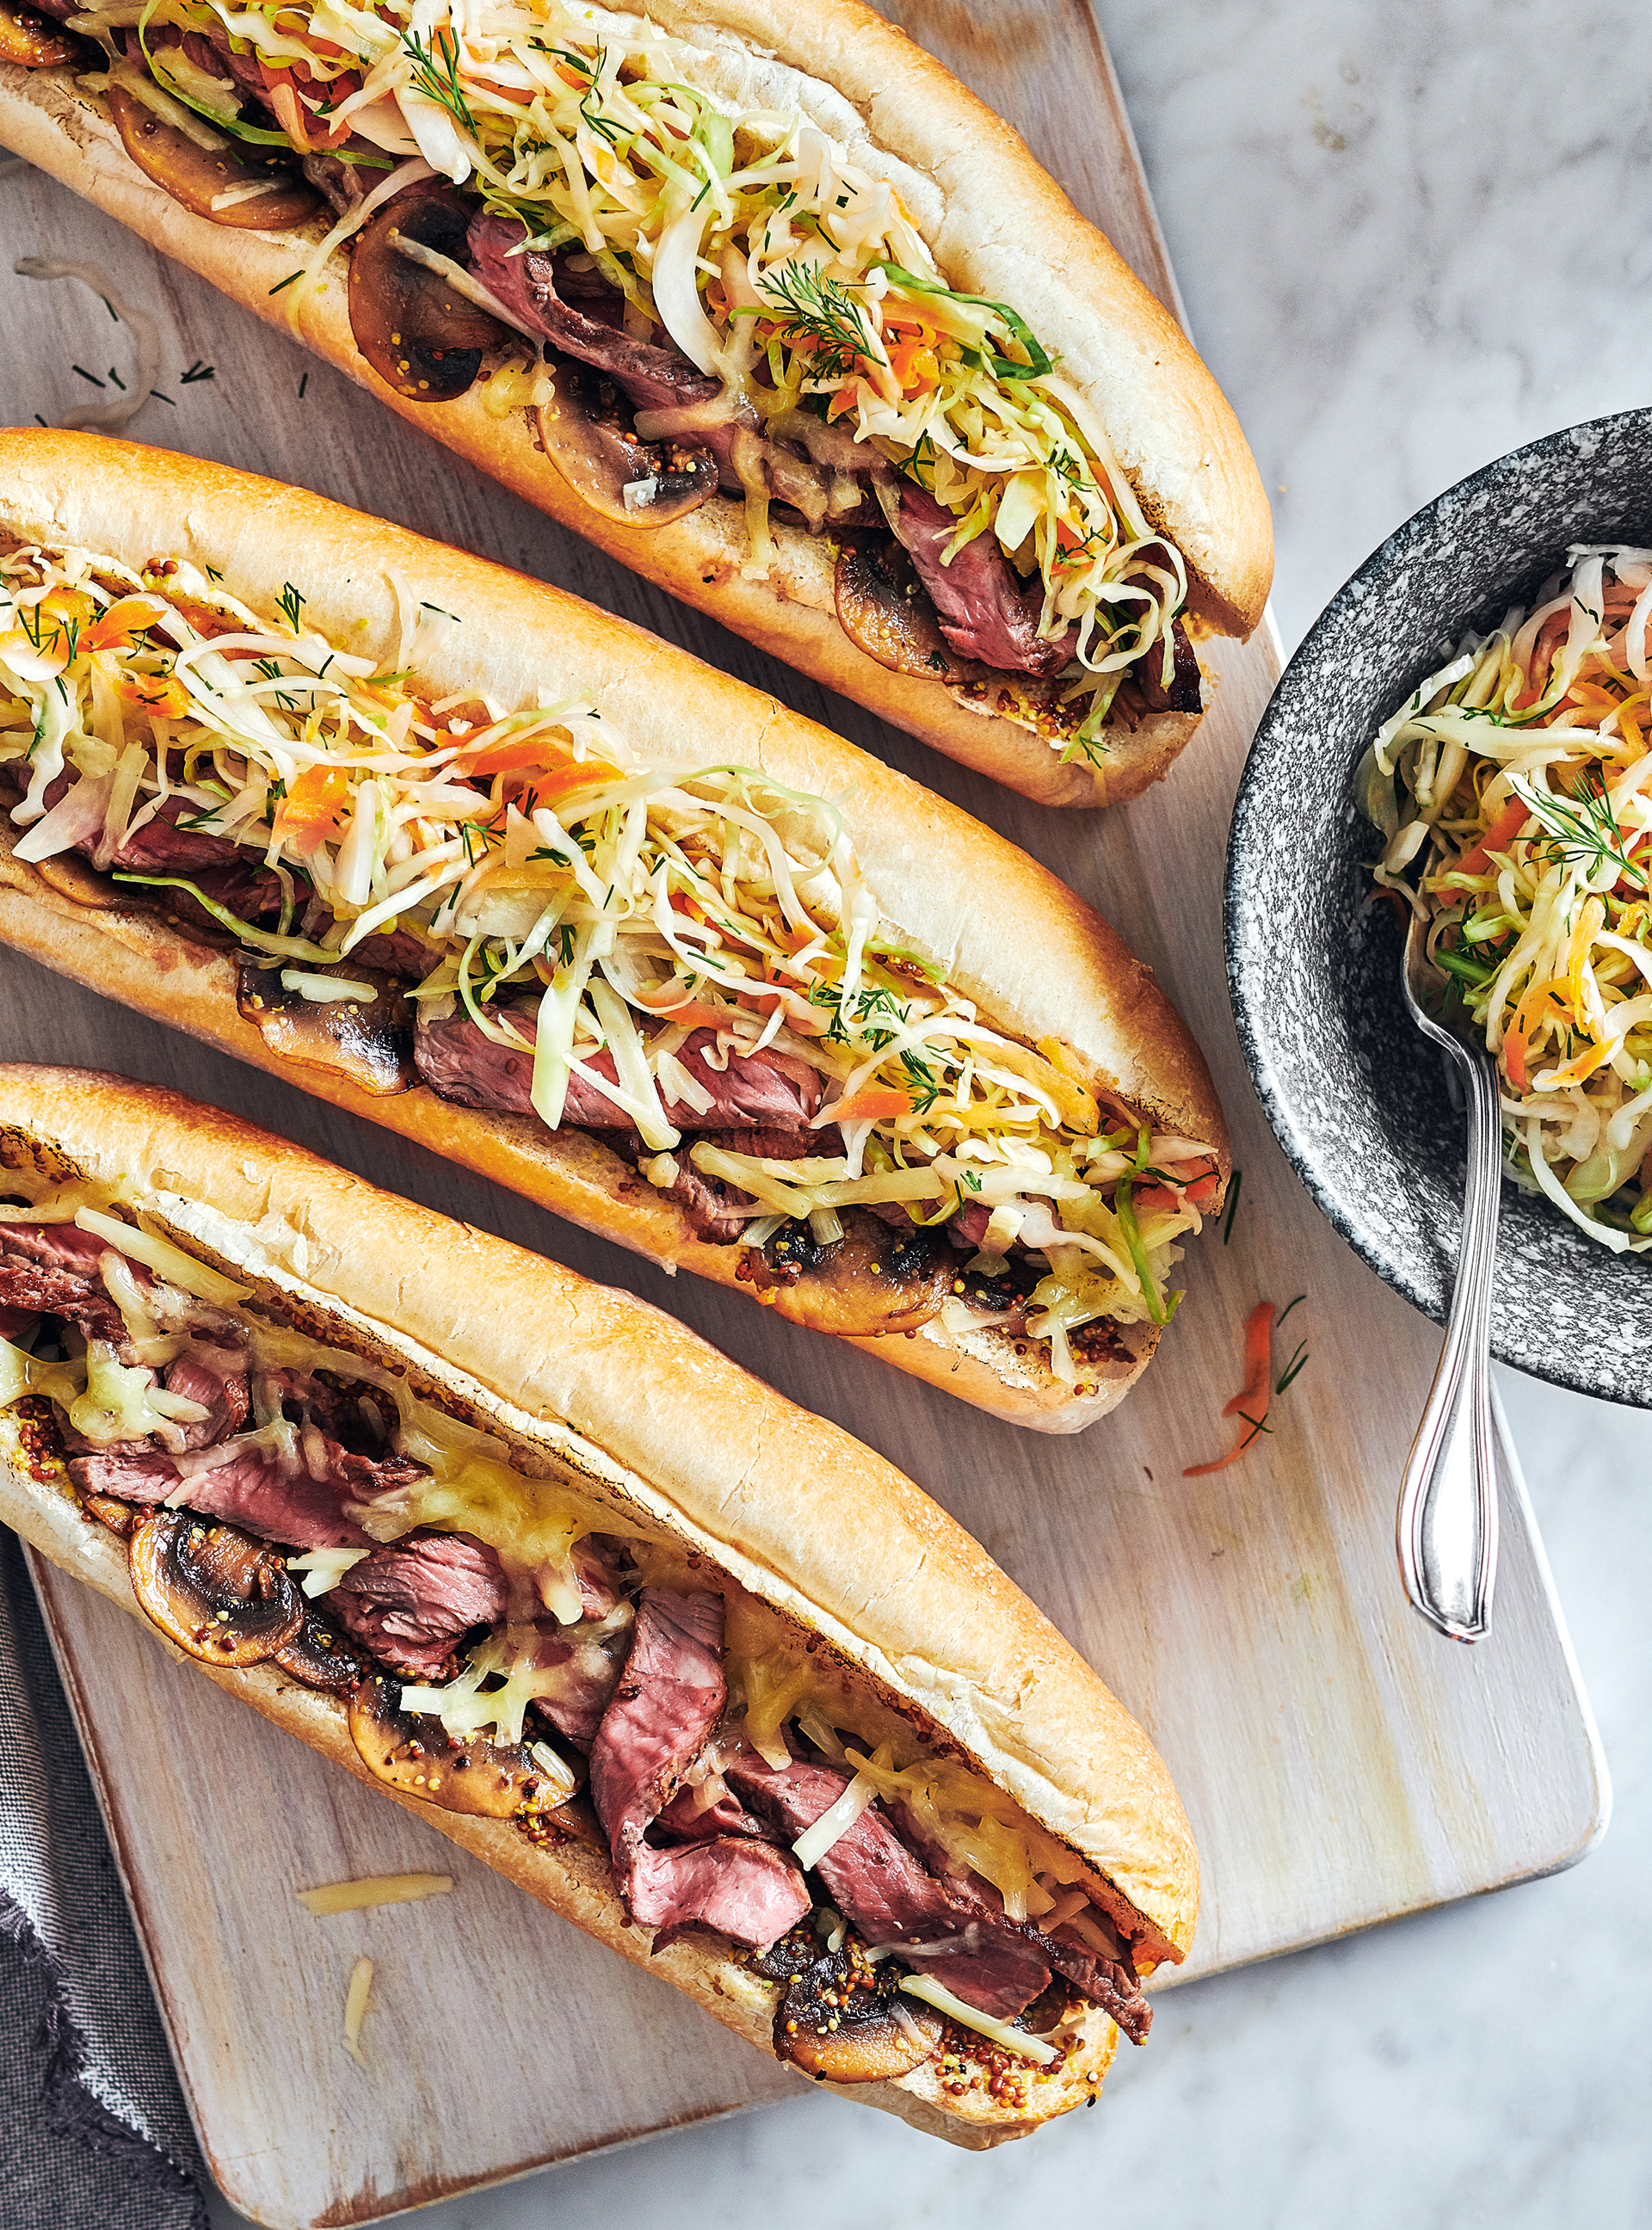 Beef Sandwiches with Mushrooms and Pickled Cabbage